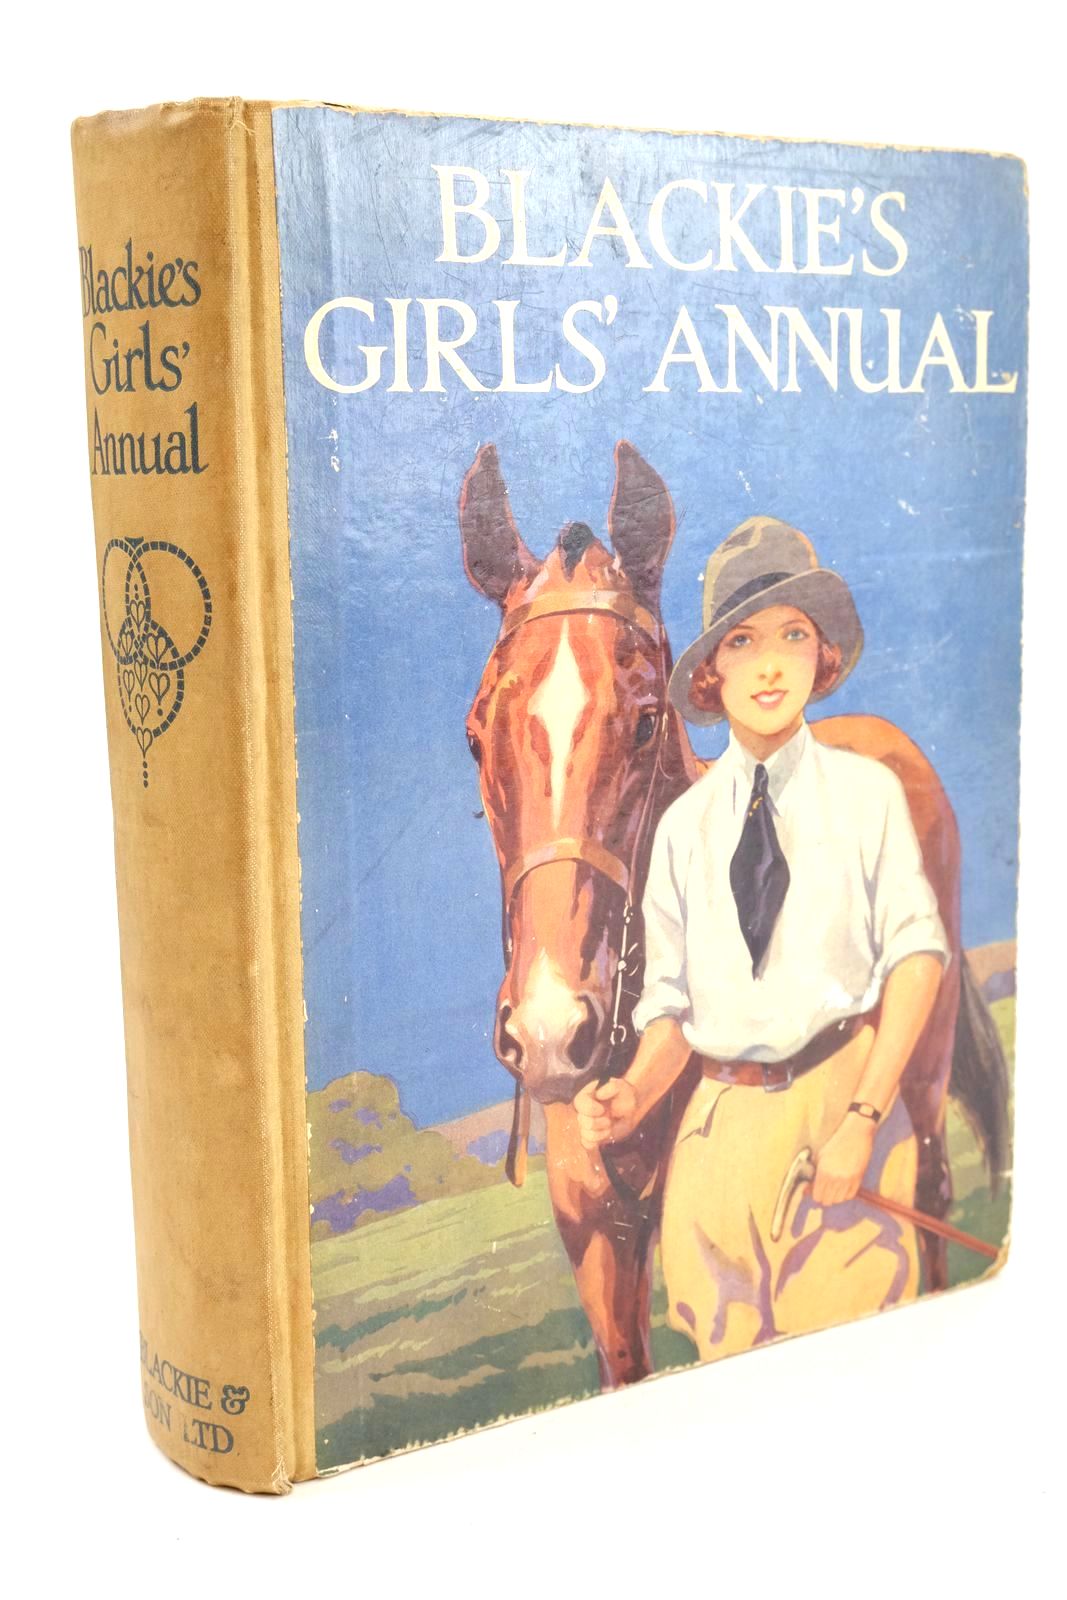 Photo of BLACKIE'S GIRLS' ANNUAL written by Buckingham, M.E.
Cobb, Ruth
Joan, Natalie
Methley, Violet M.
et al, illustrated by Bestall, Alfred
Brock, C.E.
et al., published by Blackie & Son Ltd. (STOCK CODE: 1324768)  for sale by Stella & Rose's Books